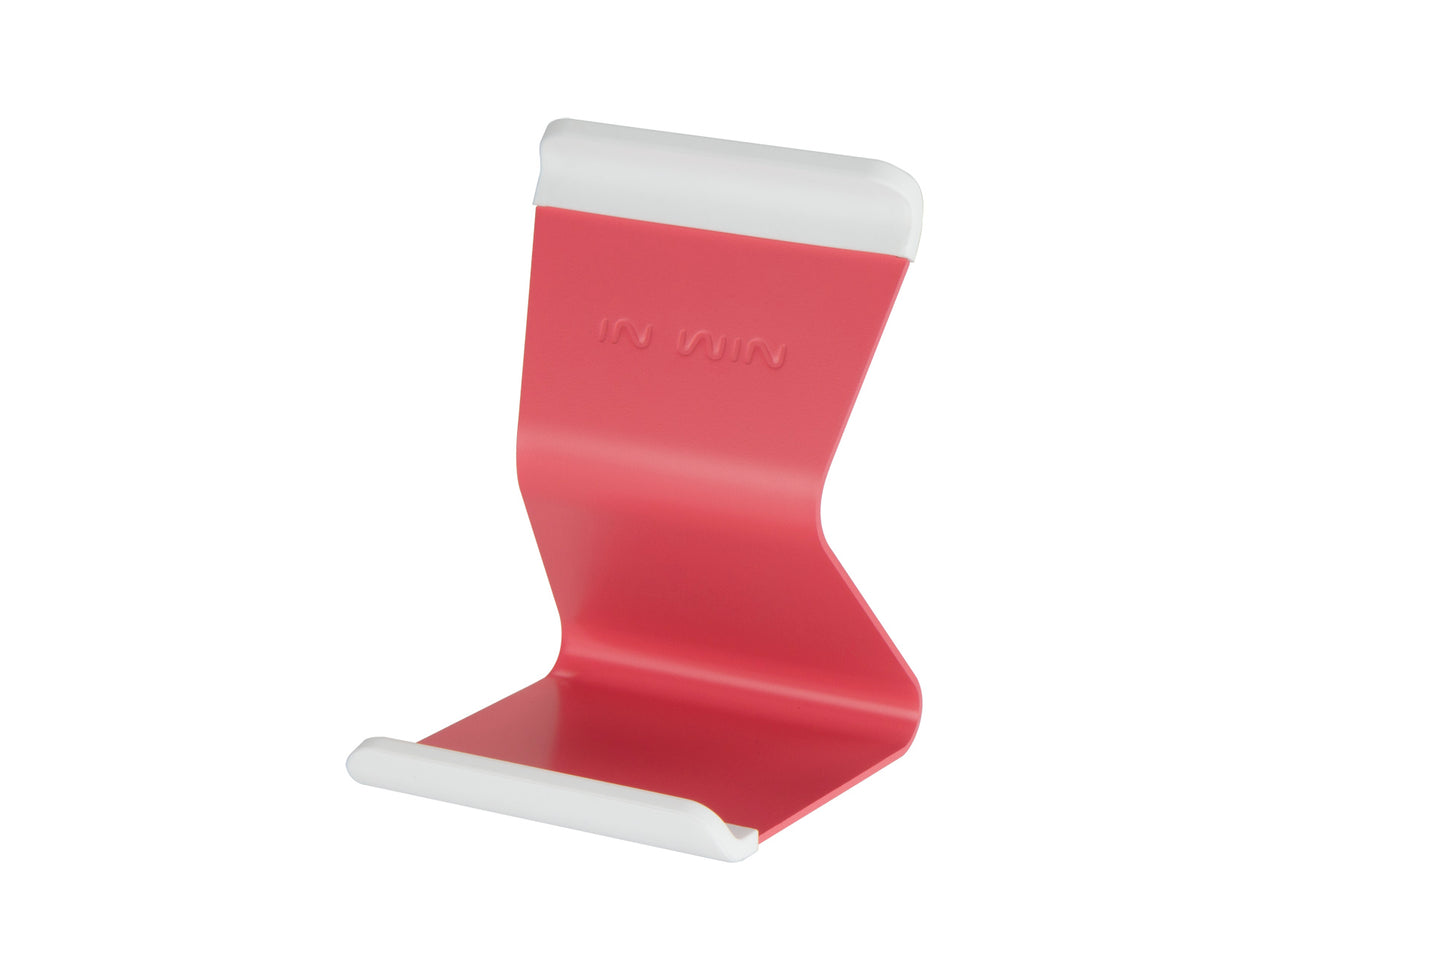 iSeat Mini (Tablet Stand)